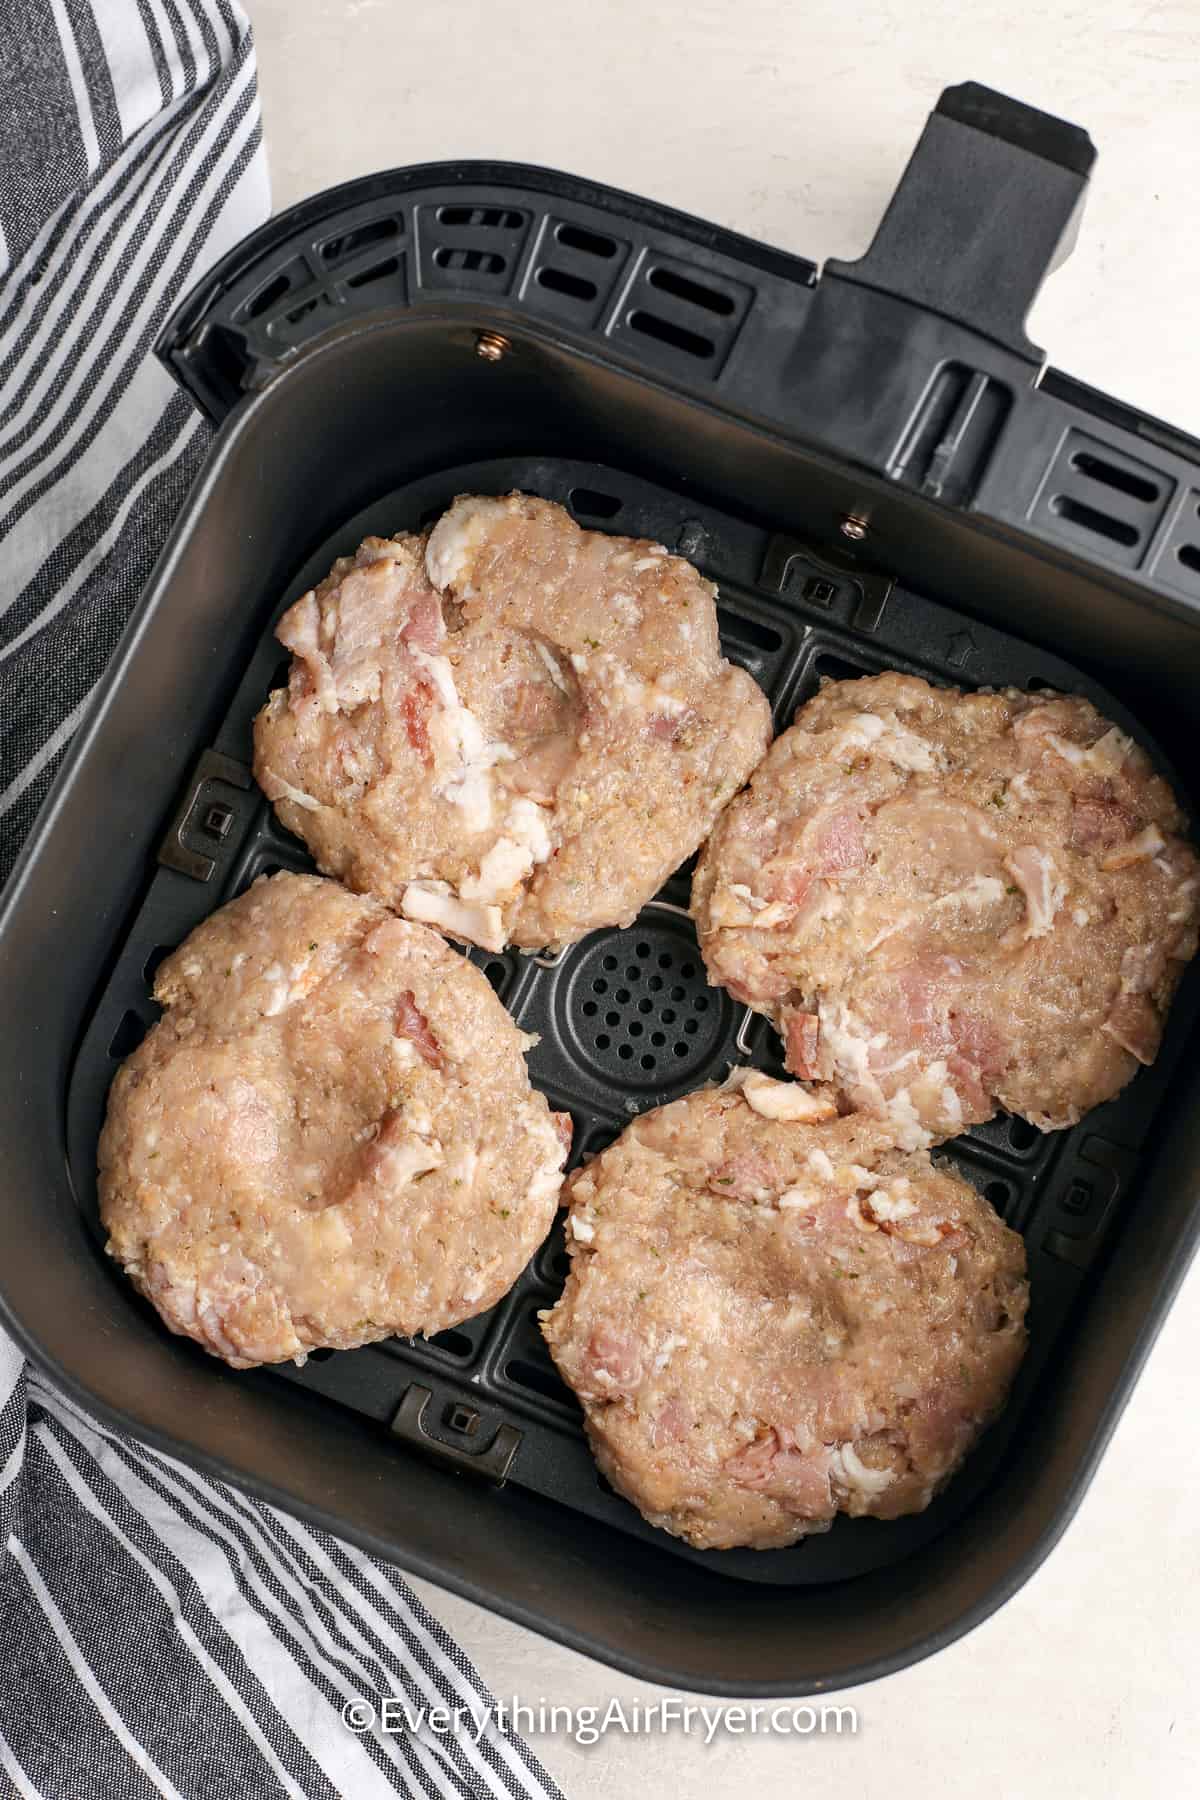 uncooked air fryer chicken burgers in an air fryer tray